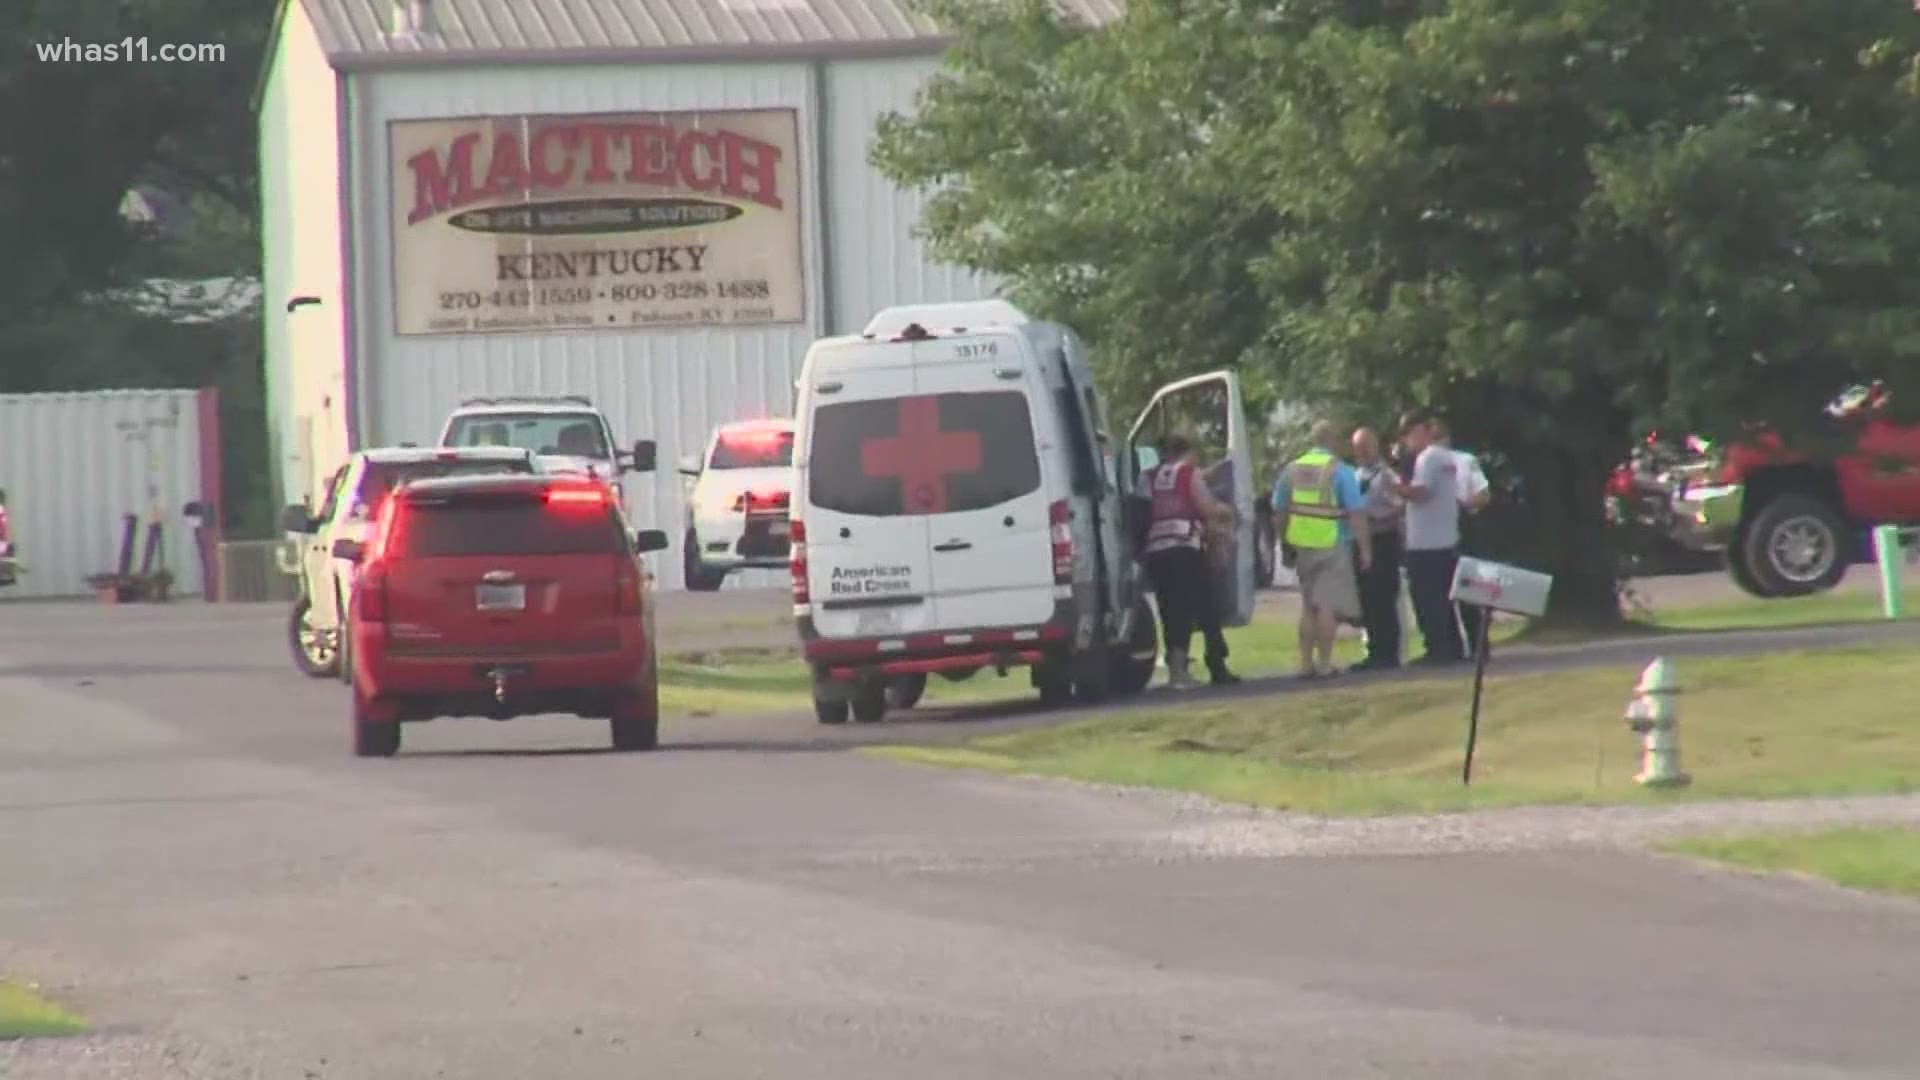 Ten people are hurt after an explosion at a Dippin' Dots plant in western Kentucky.